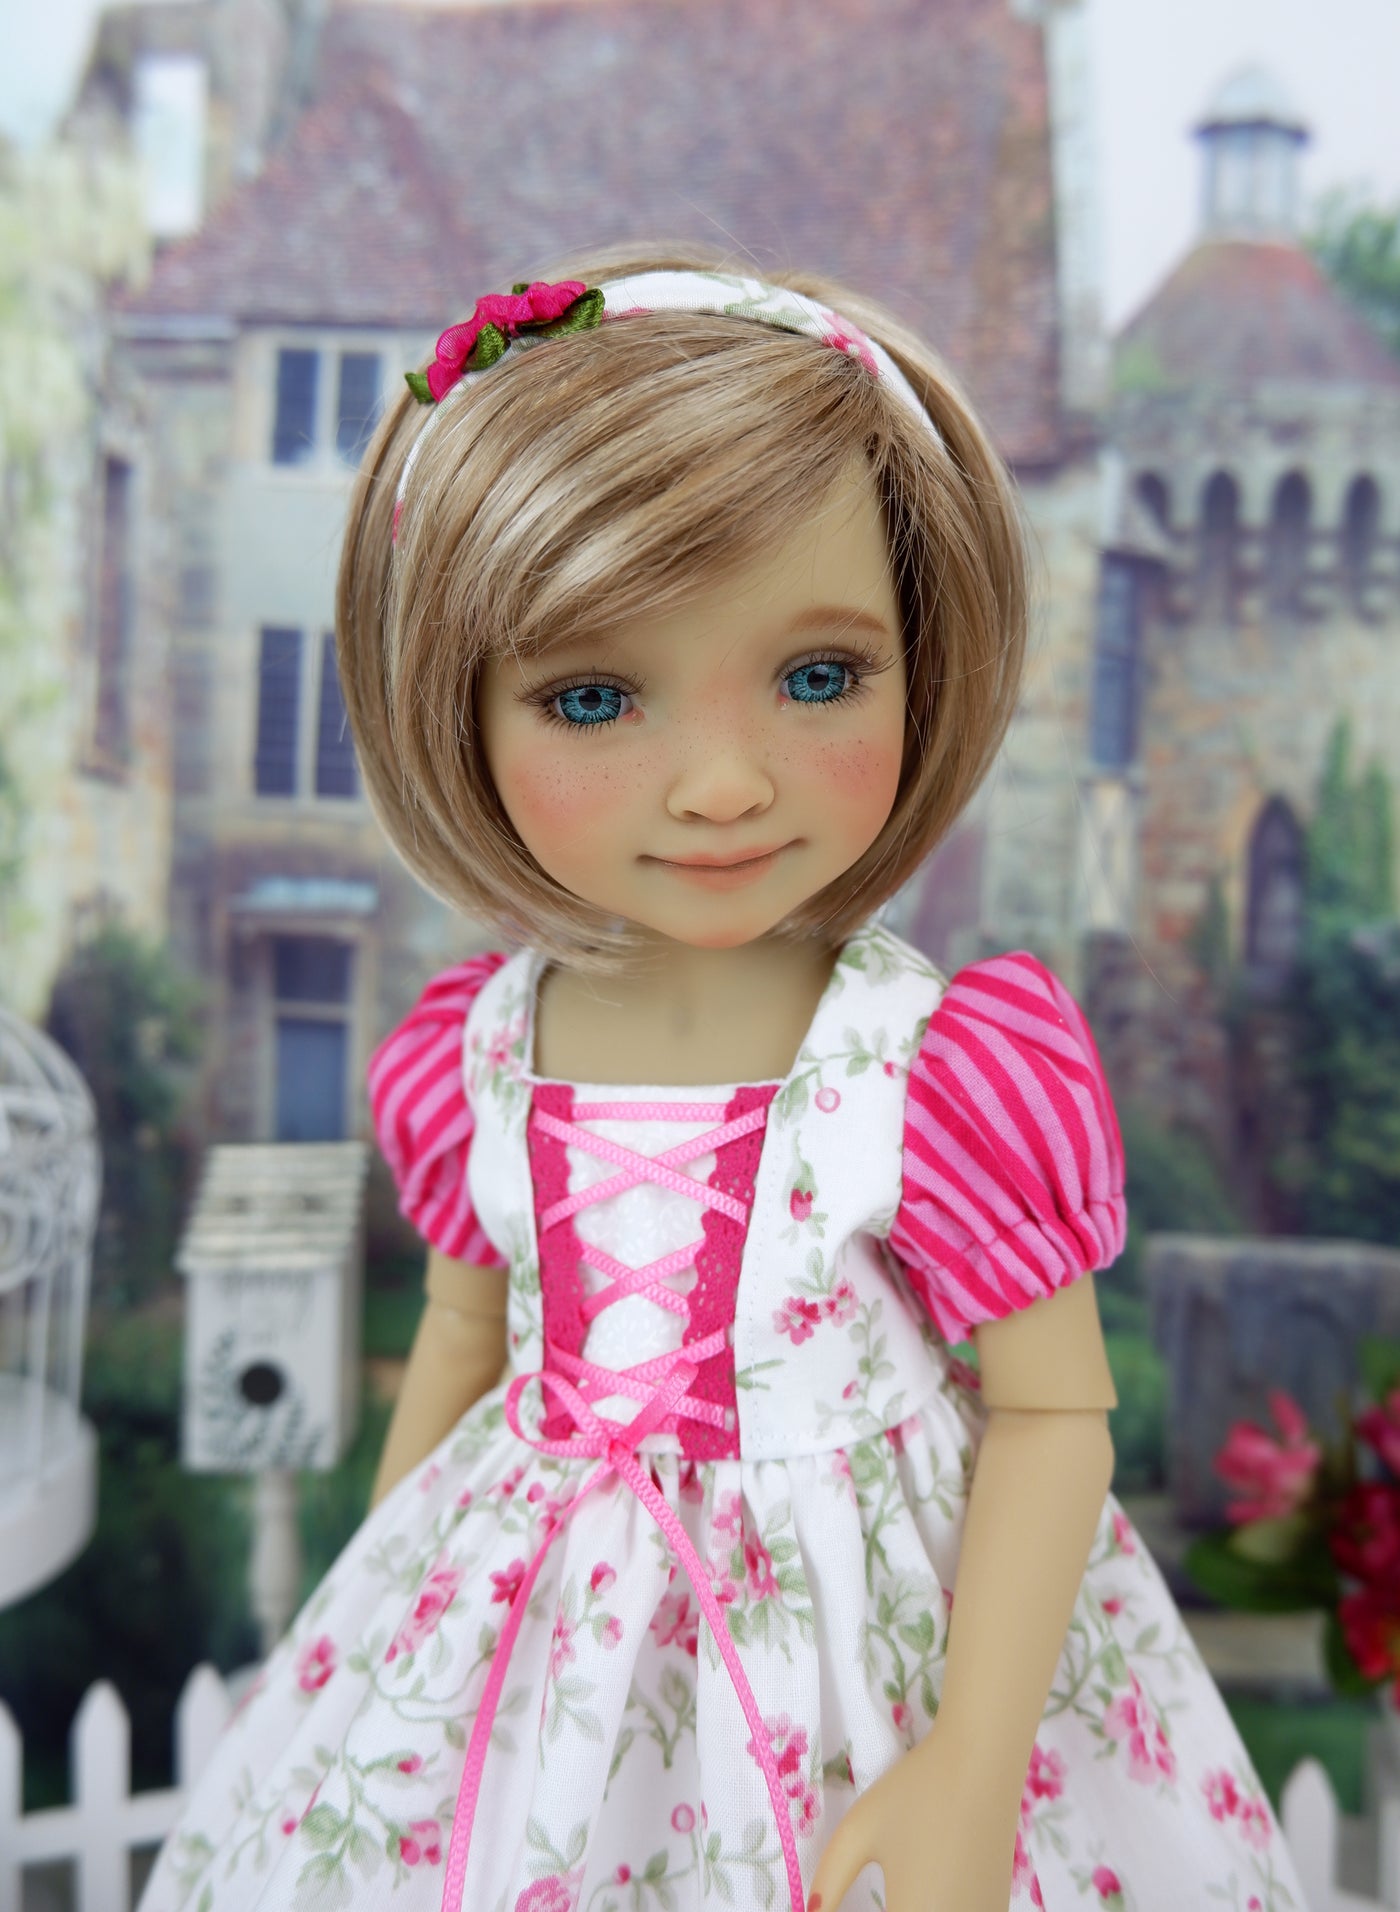 Bavarian Rose - dress ensemble with shoes for Ruby Red Fashion Friends doll